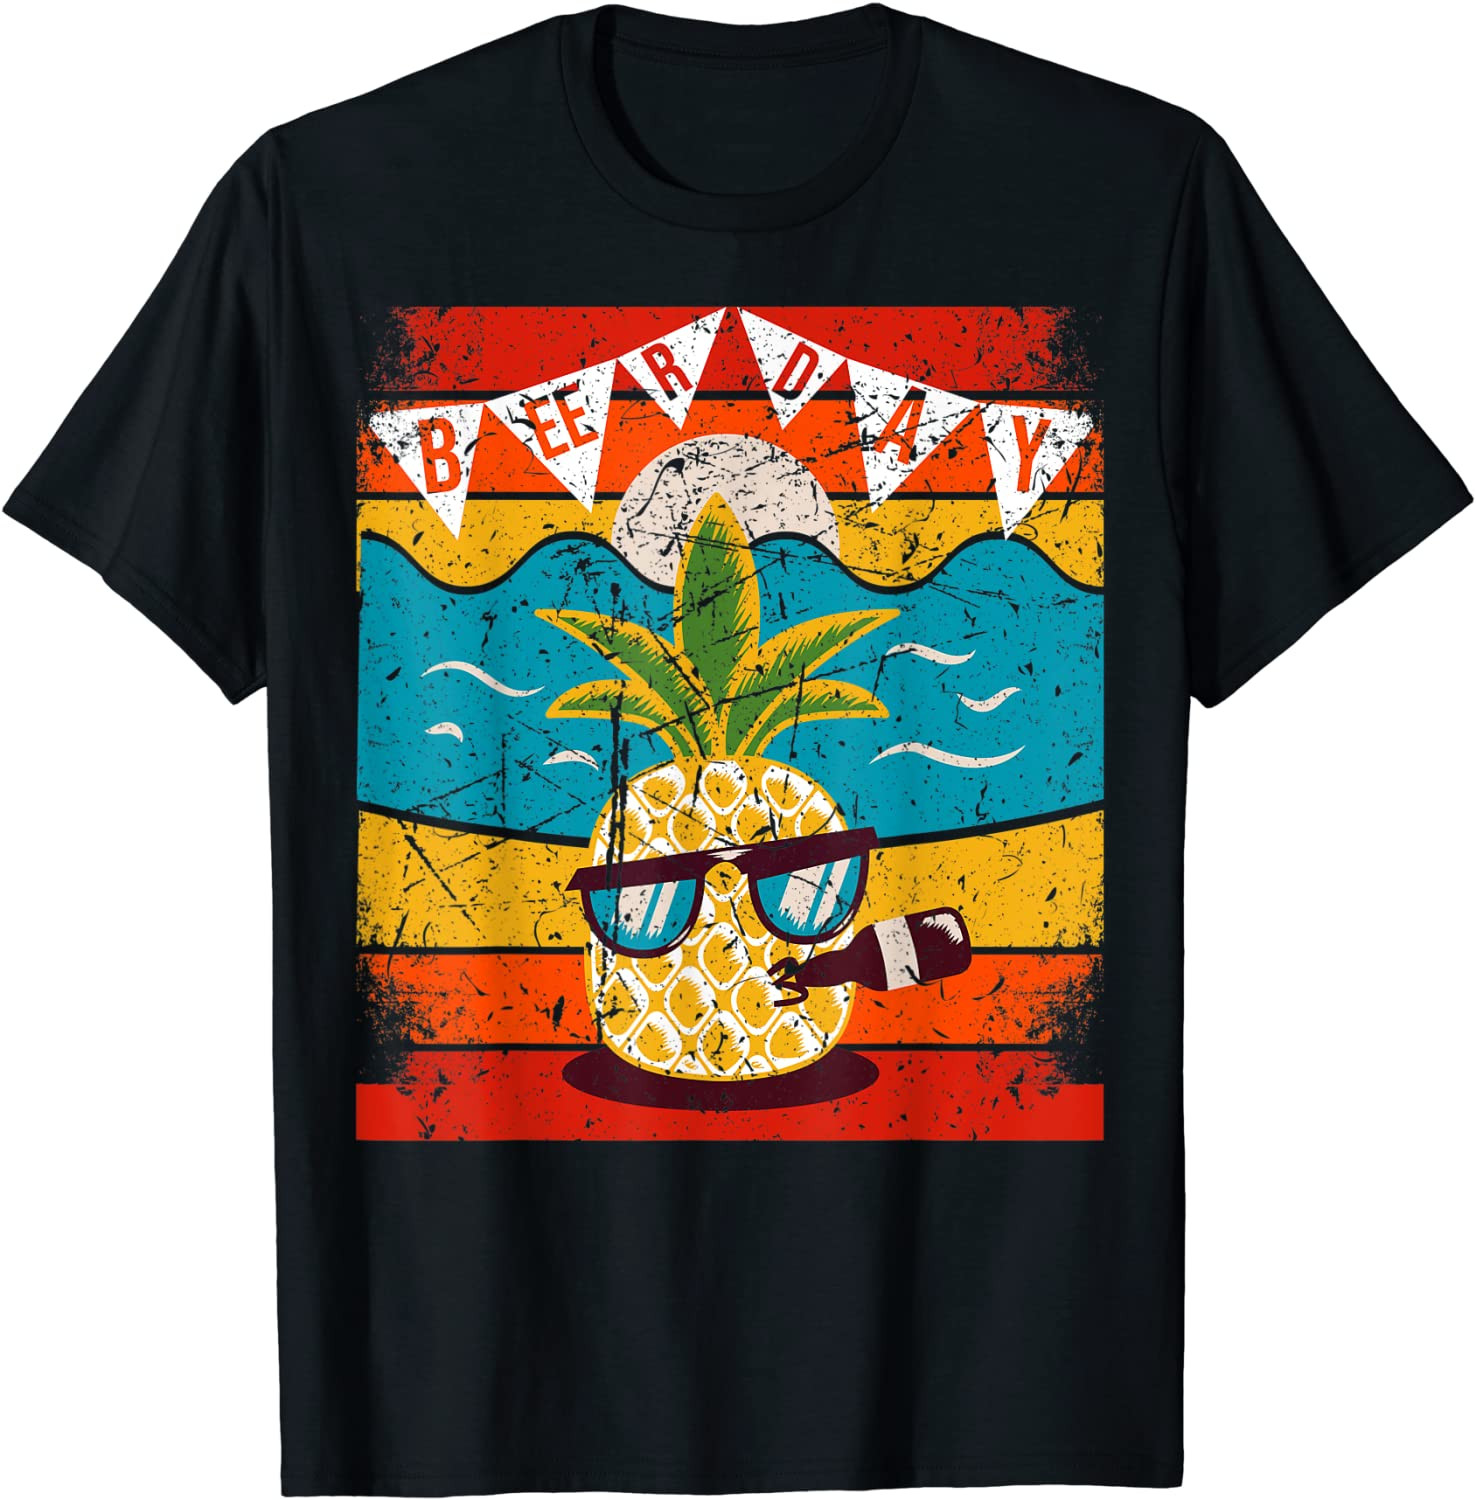 Beer Day, Beach Pineapple And Sunglasses, Day Drinking T-Shirt